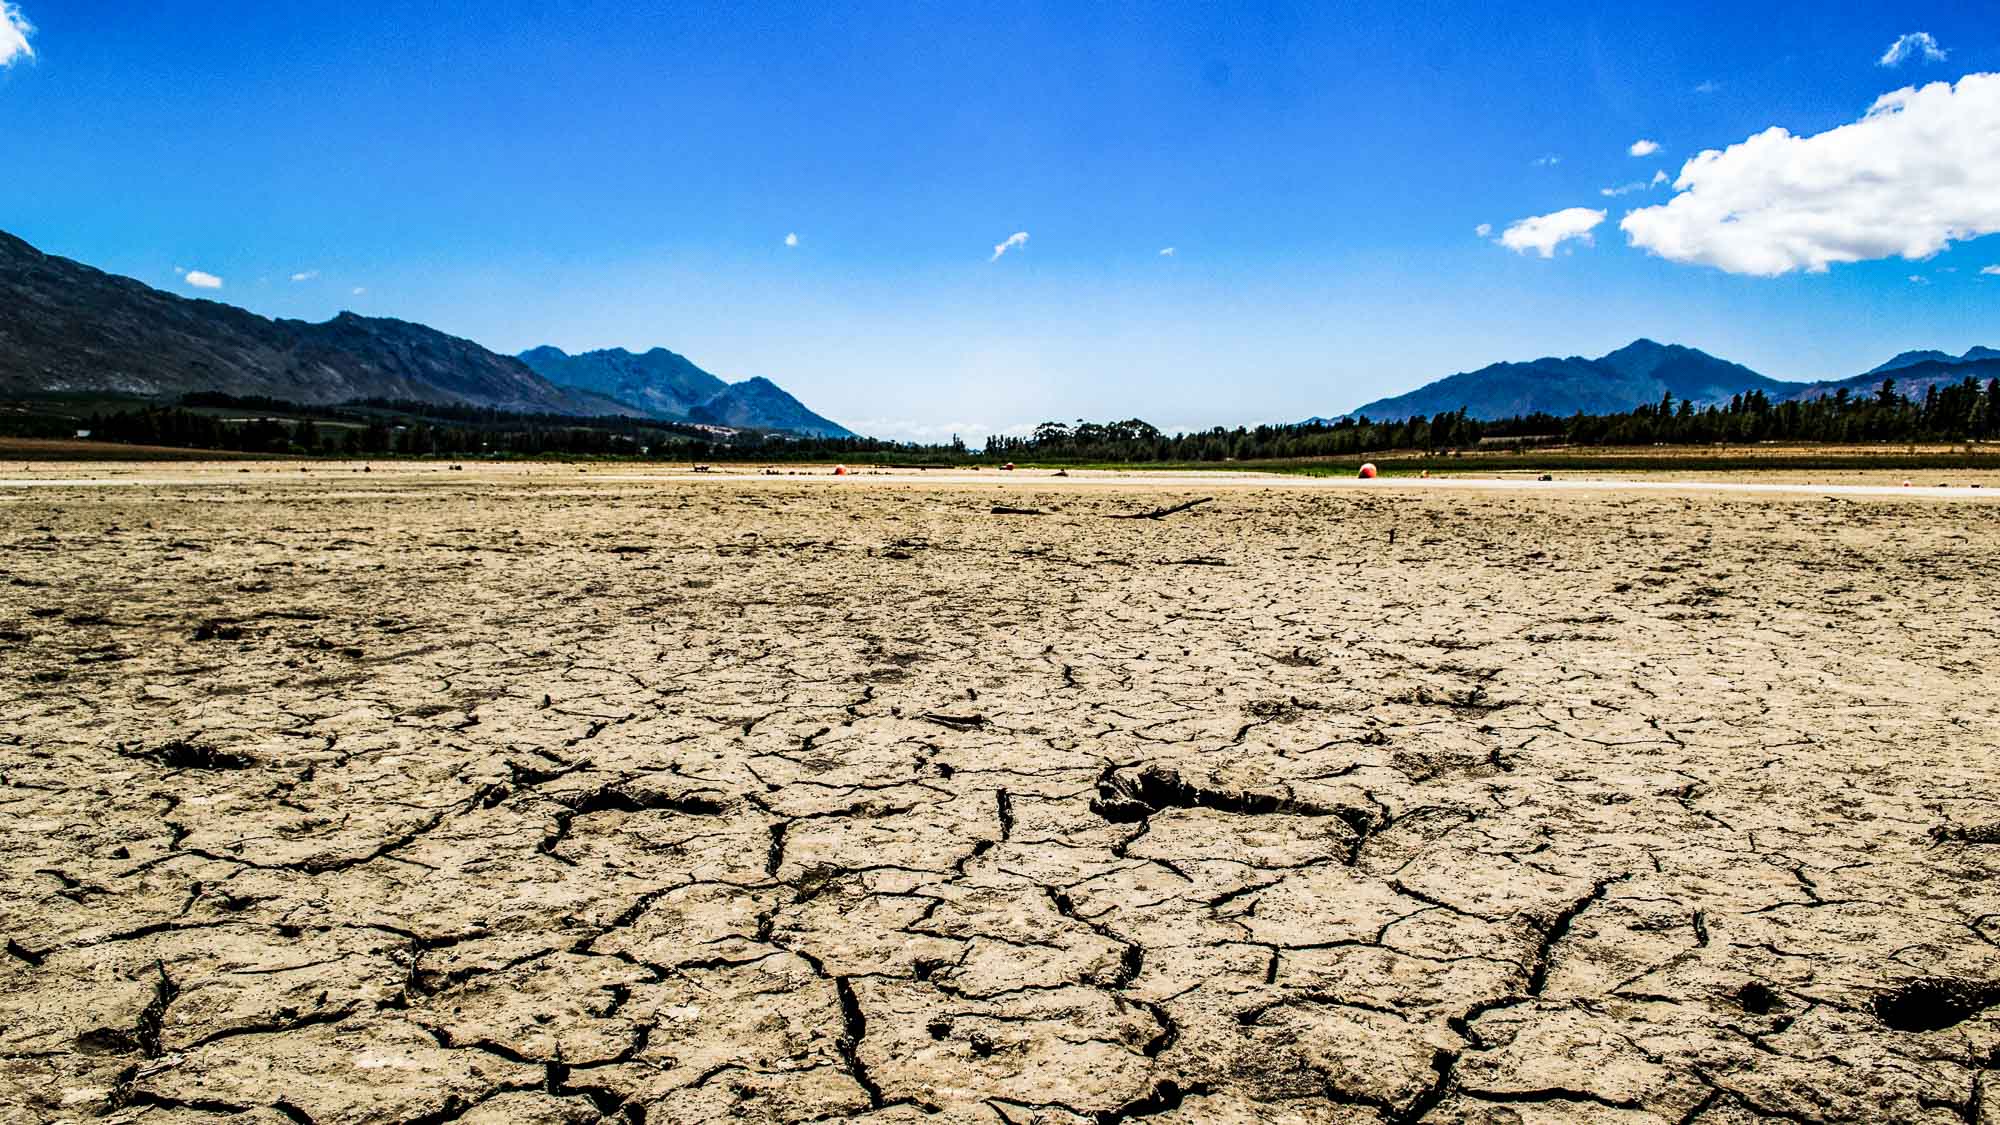 What does Cape Town's water crisis mean for travelers?